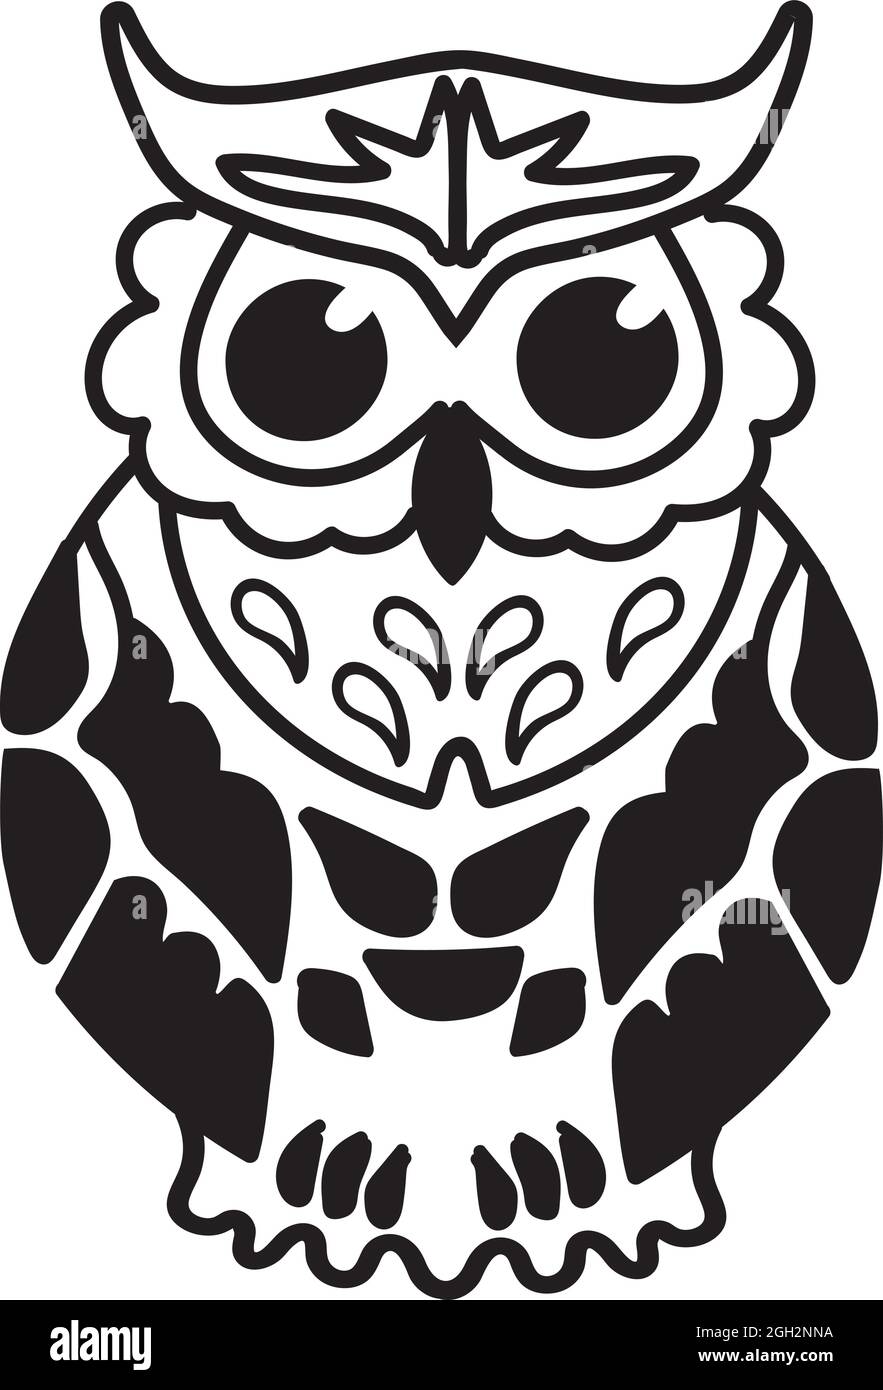 vector illustration of a floral owl isolated on white background. Stock Vector